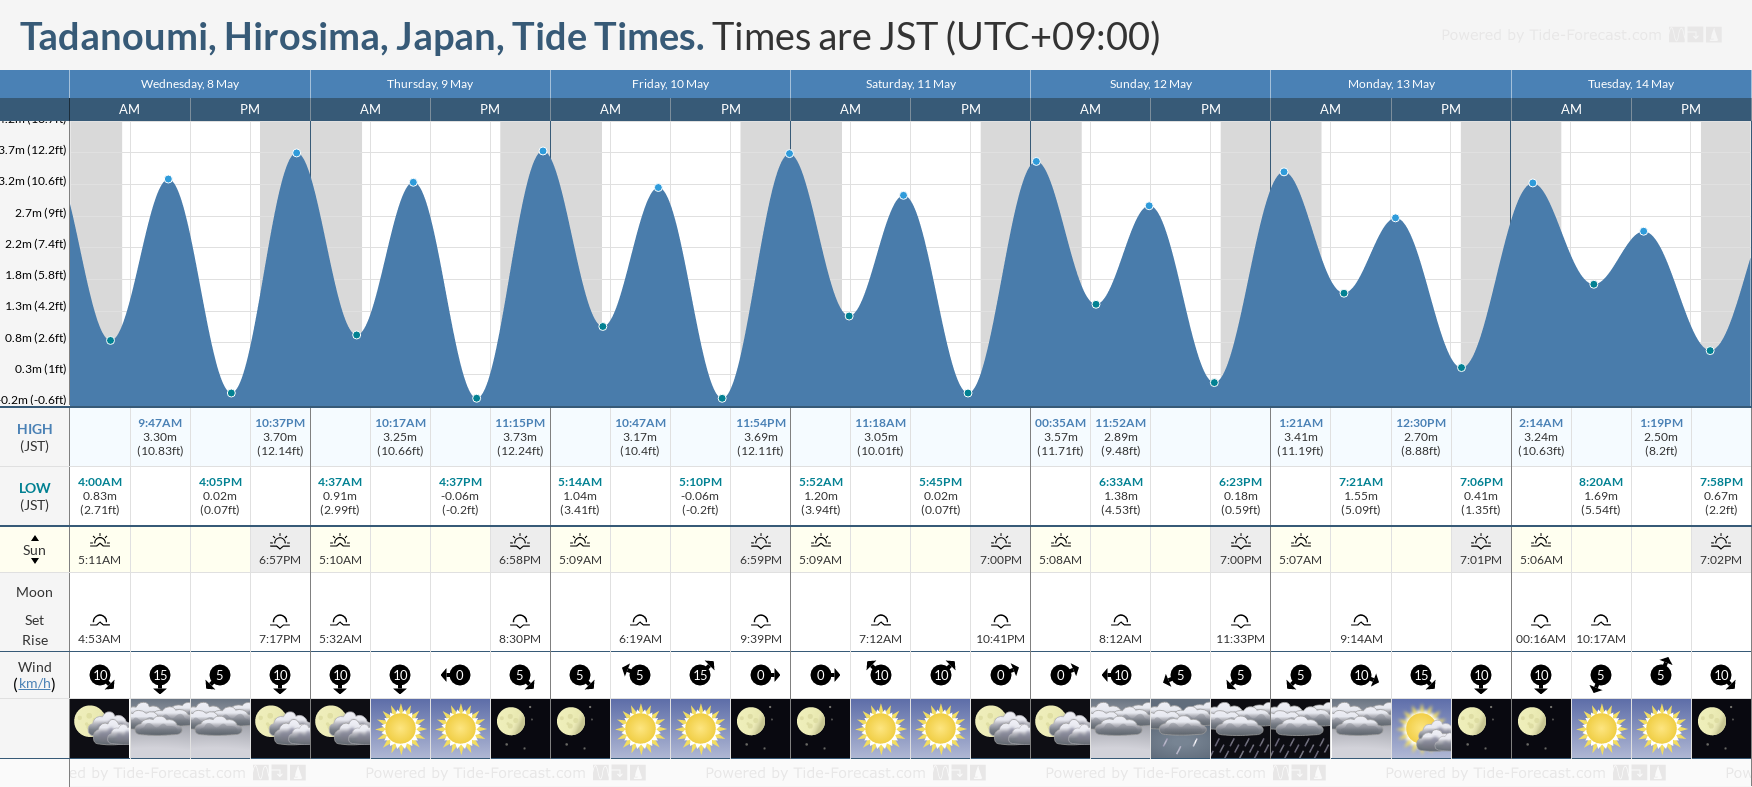 Tadanoumi, Hirosima, Japan Tide Chart including high and low tide tide times for the next 7 days